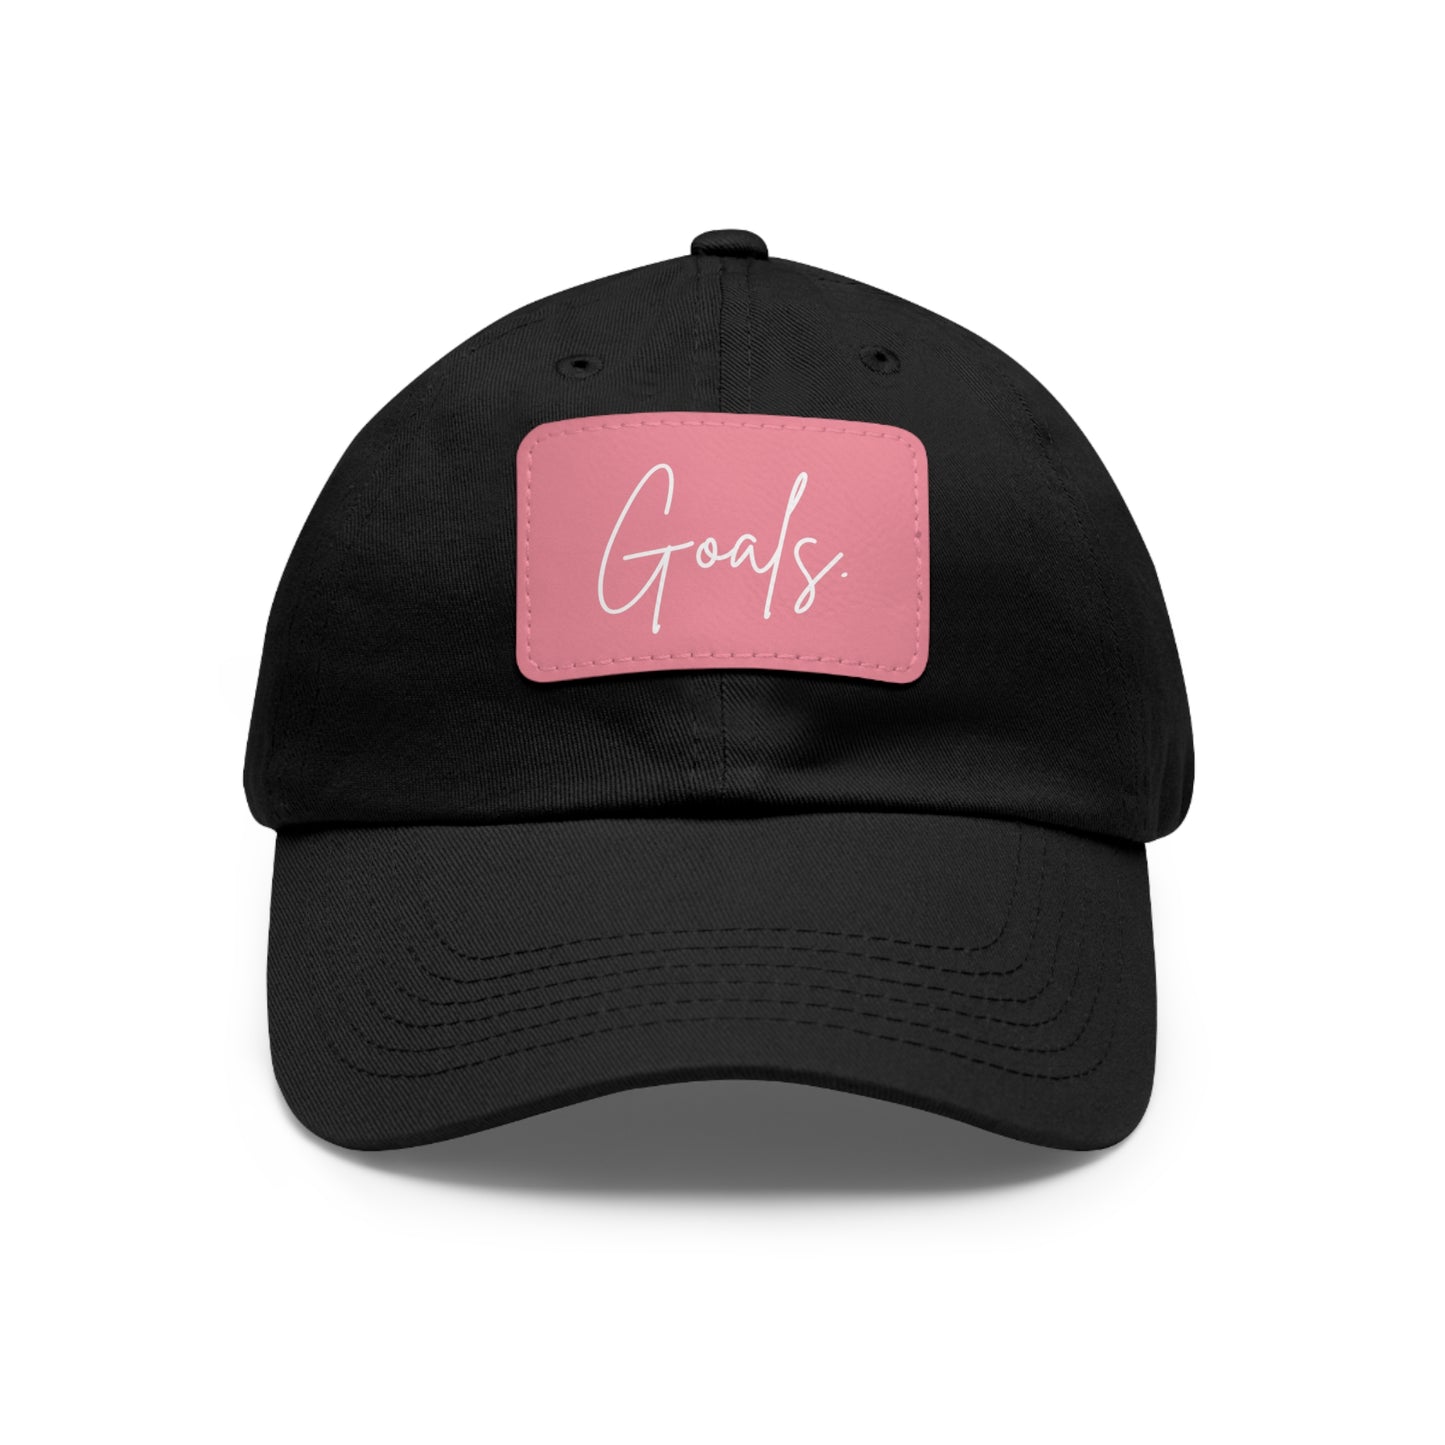 JUST GOALS PATCHED HAT